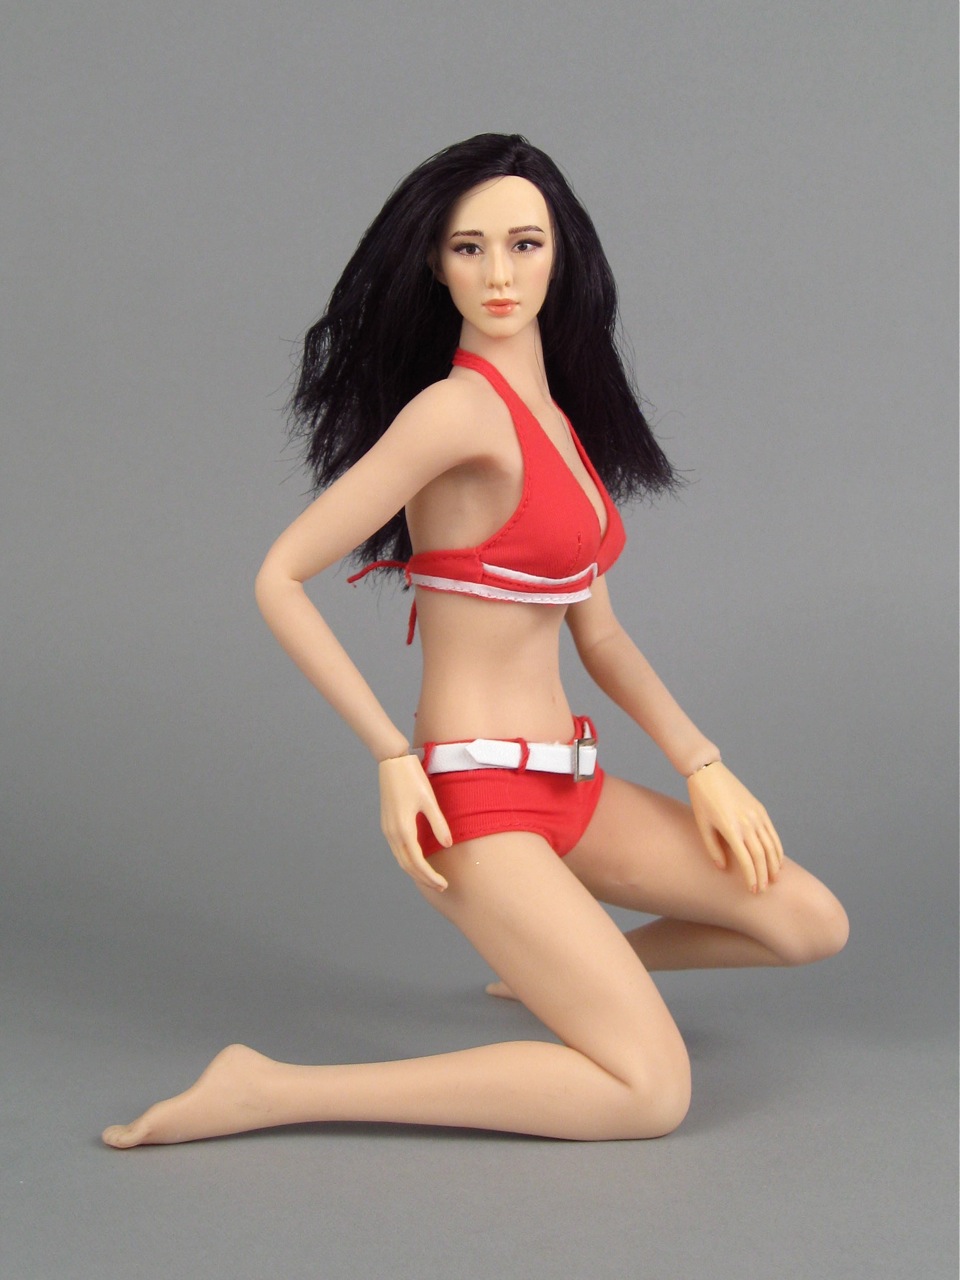 Phicen S Super Flexible Seamless 1 6 Scale Figure With A Stainless